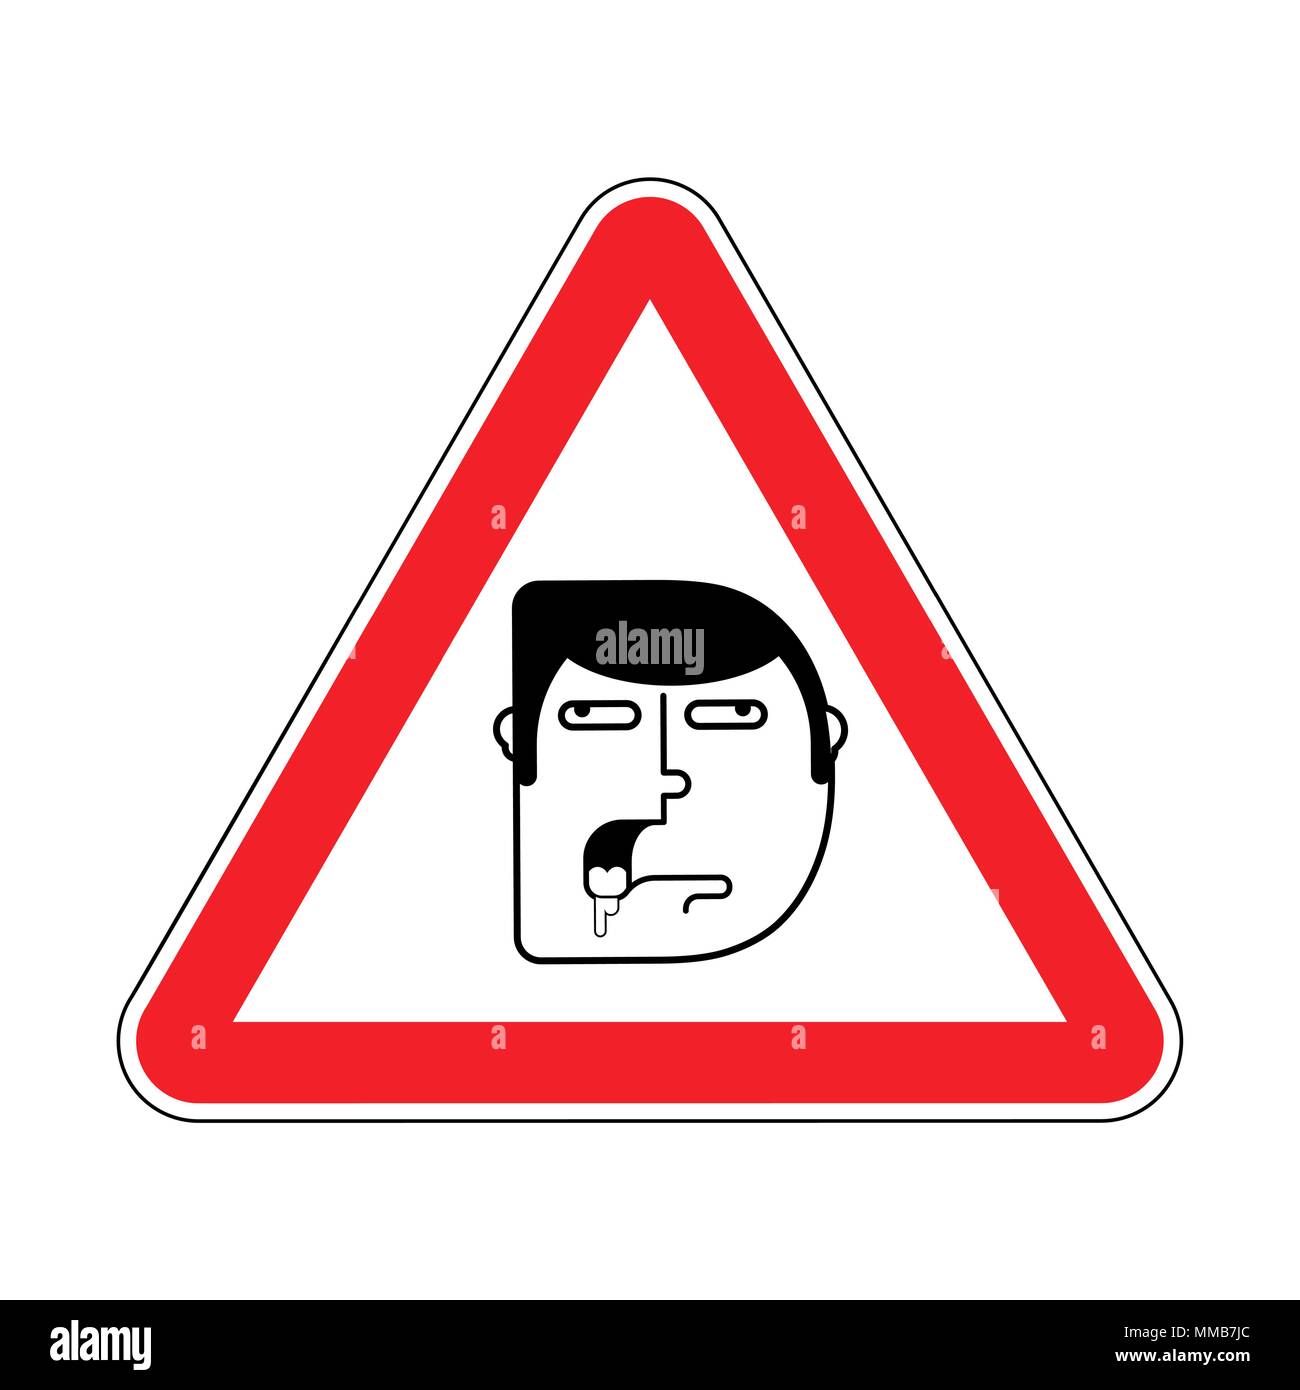 Attention stupid. Caution blunt. Road red Warning sign. Look out fool. Vector illustration Stock Vector